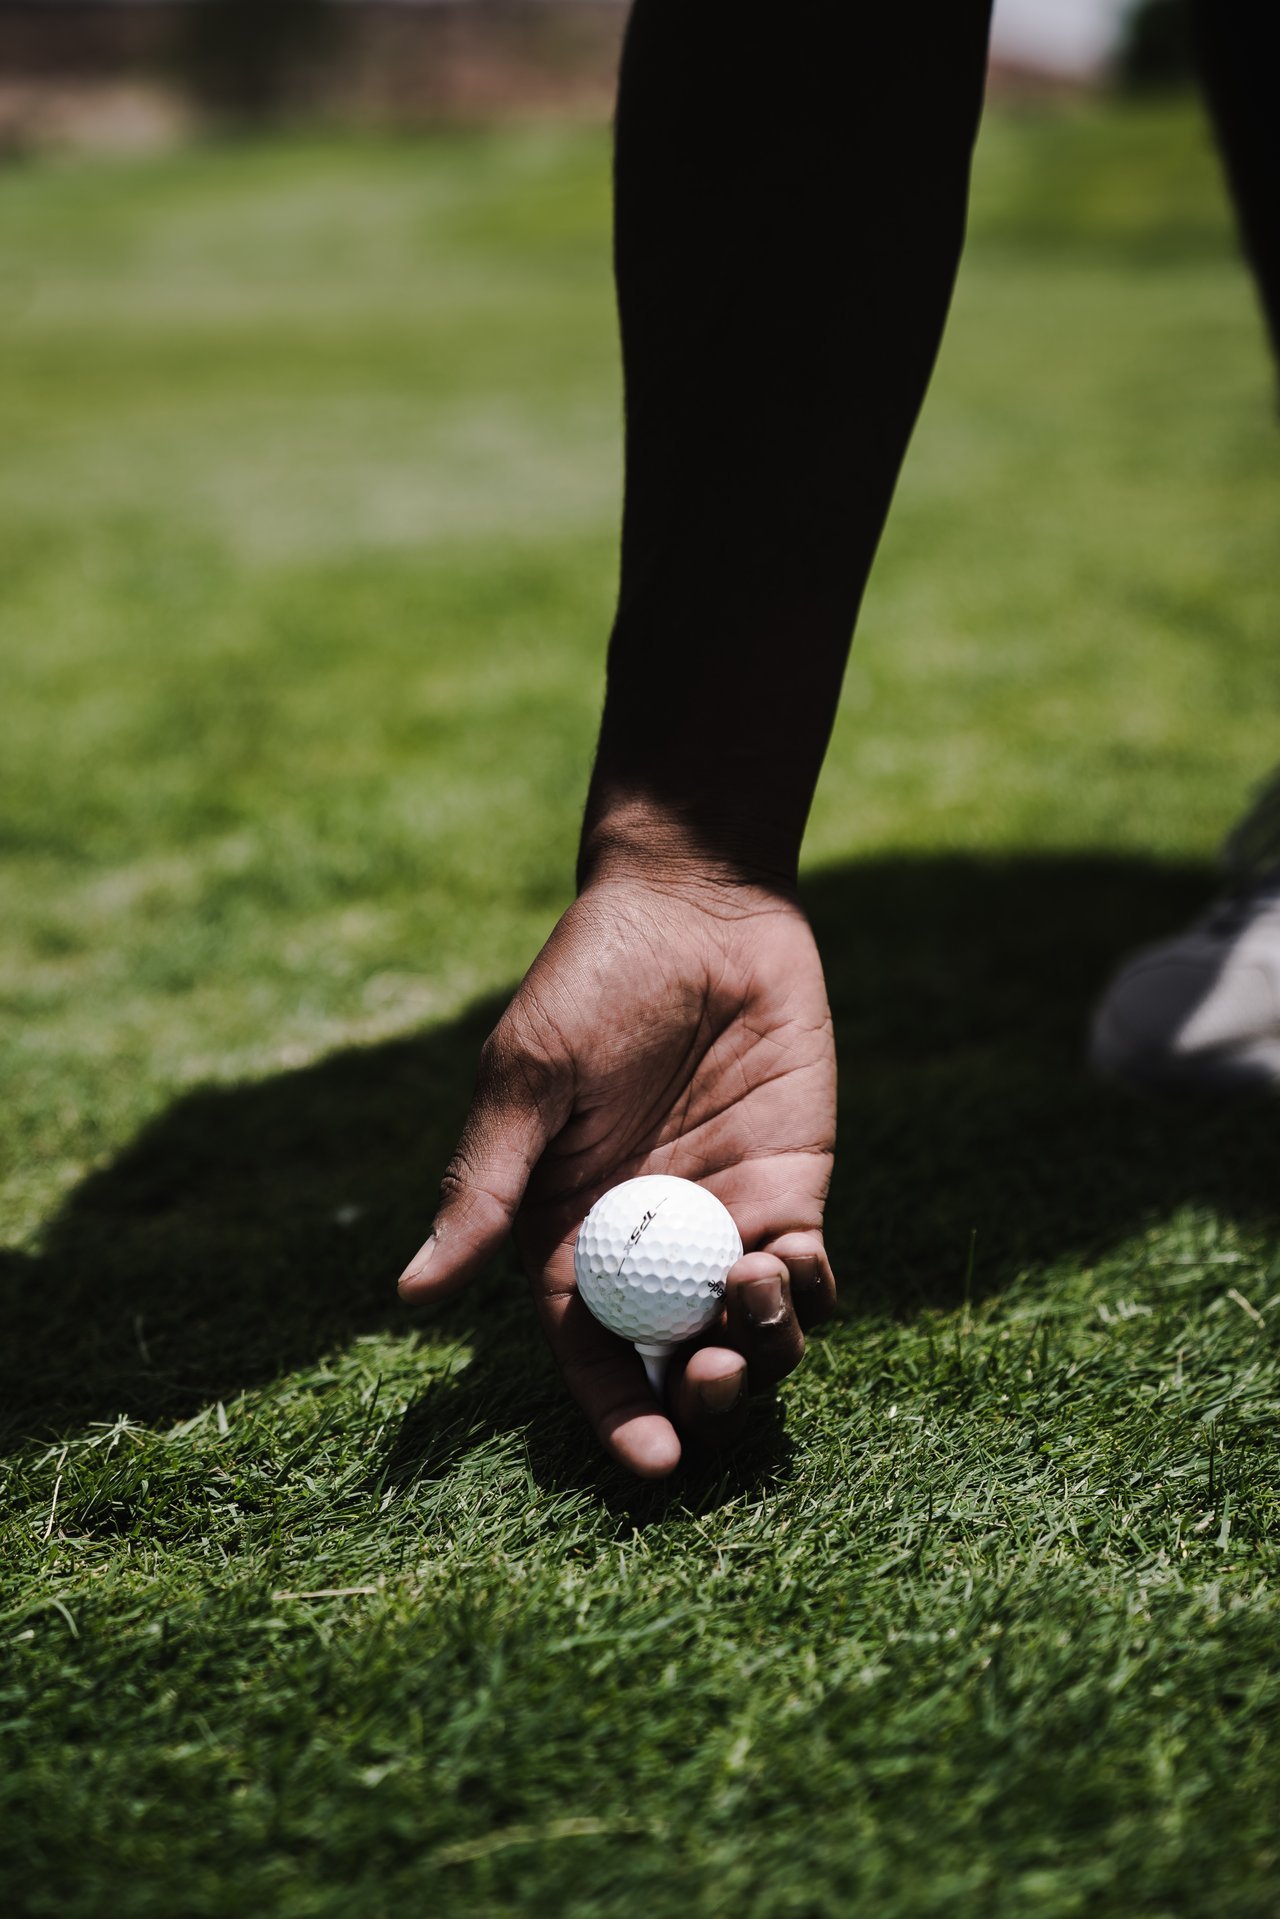 Holding that golf ball | Source: Pexels